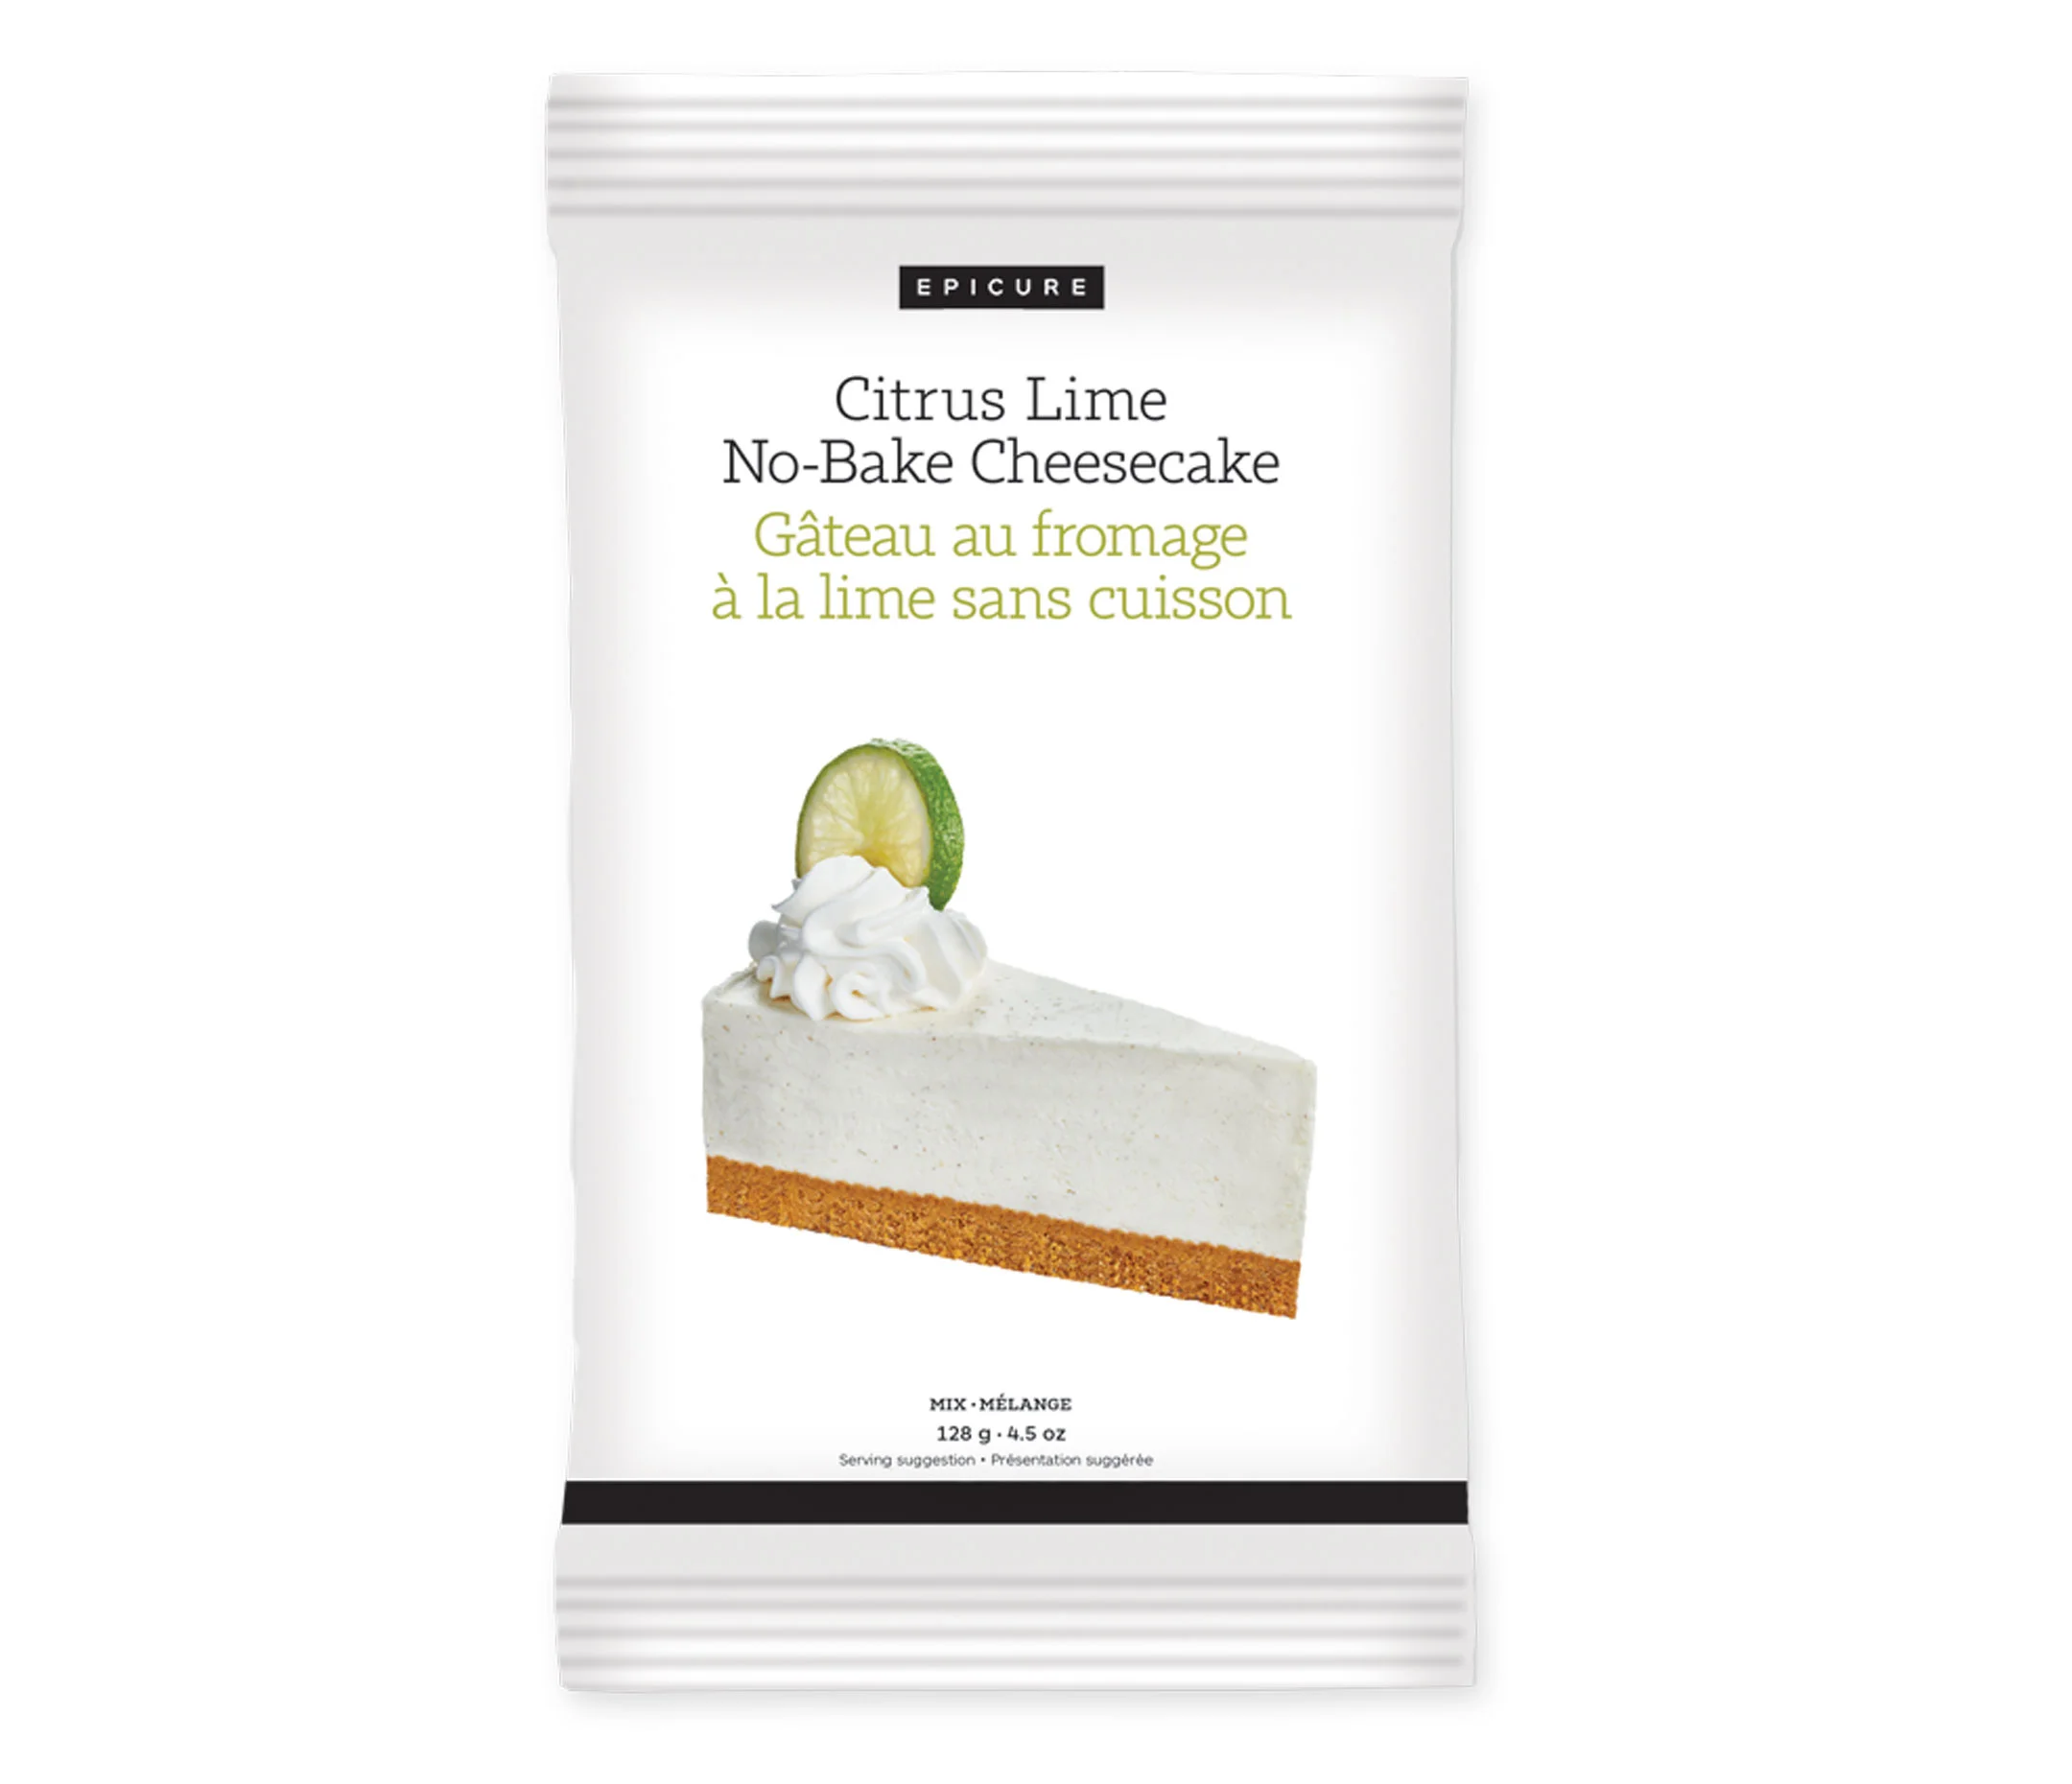 Citrus Lime No-Bake Cheesecake Mix (Pack of 2)
